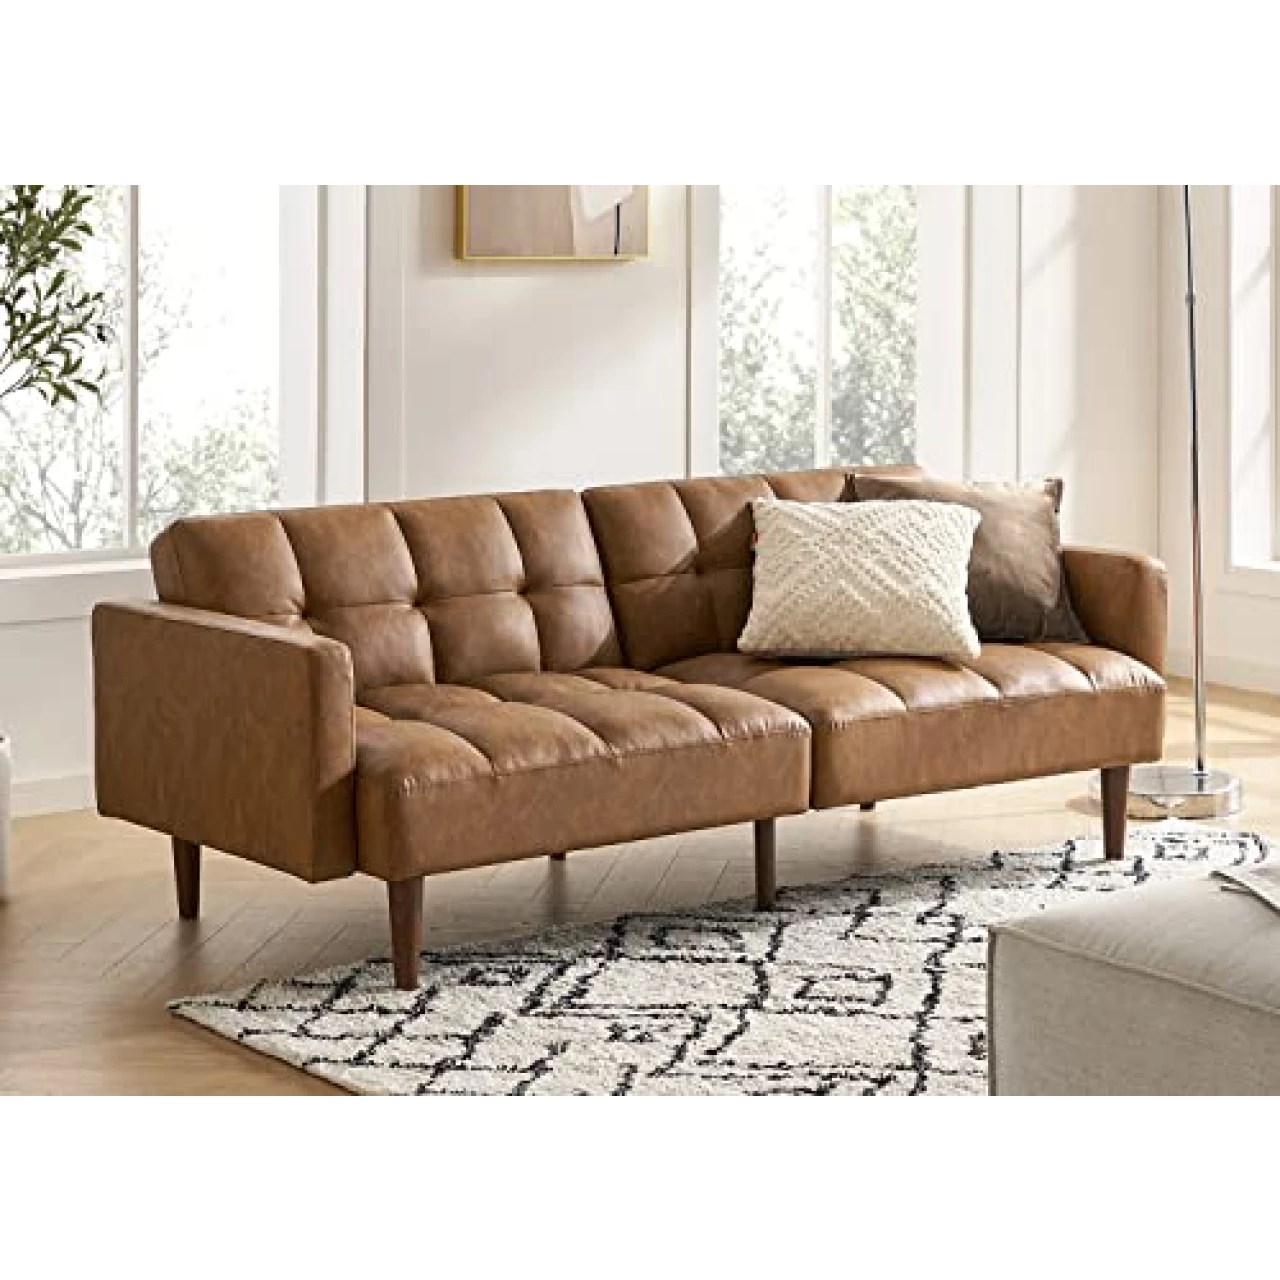 mopio Aaron Faux Leather Couch, Small Sofa, Futon, Sofa Bed, Mid Century Modern Futon Couch, Sleeper Sofa, Brown Couch, Leather Loveseat, Couches for Living Room 77.5&quot; (Faux Leather, Pecan Brown)